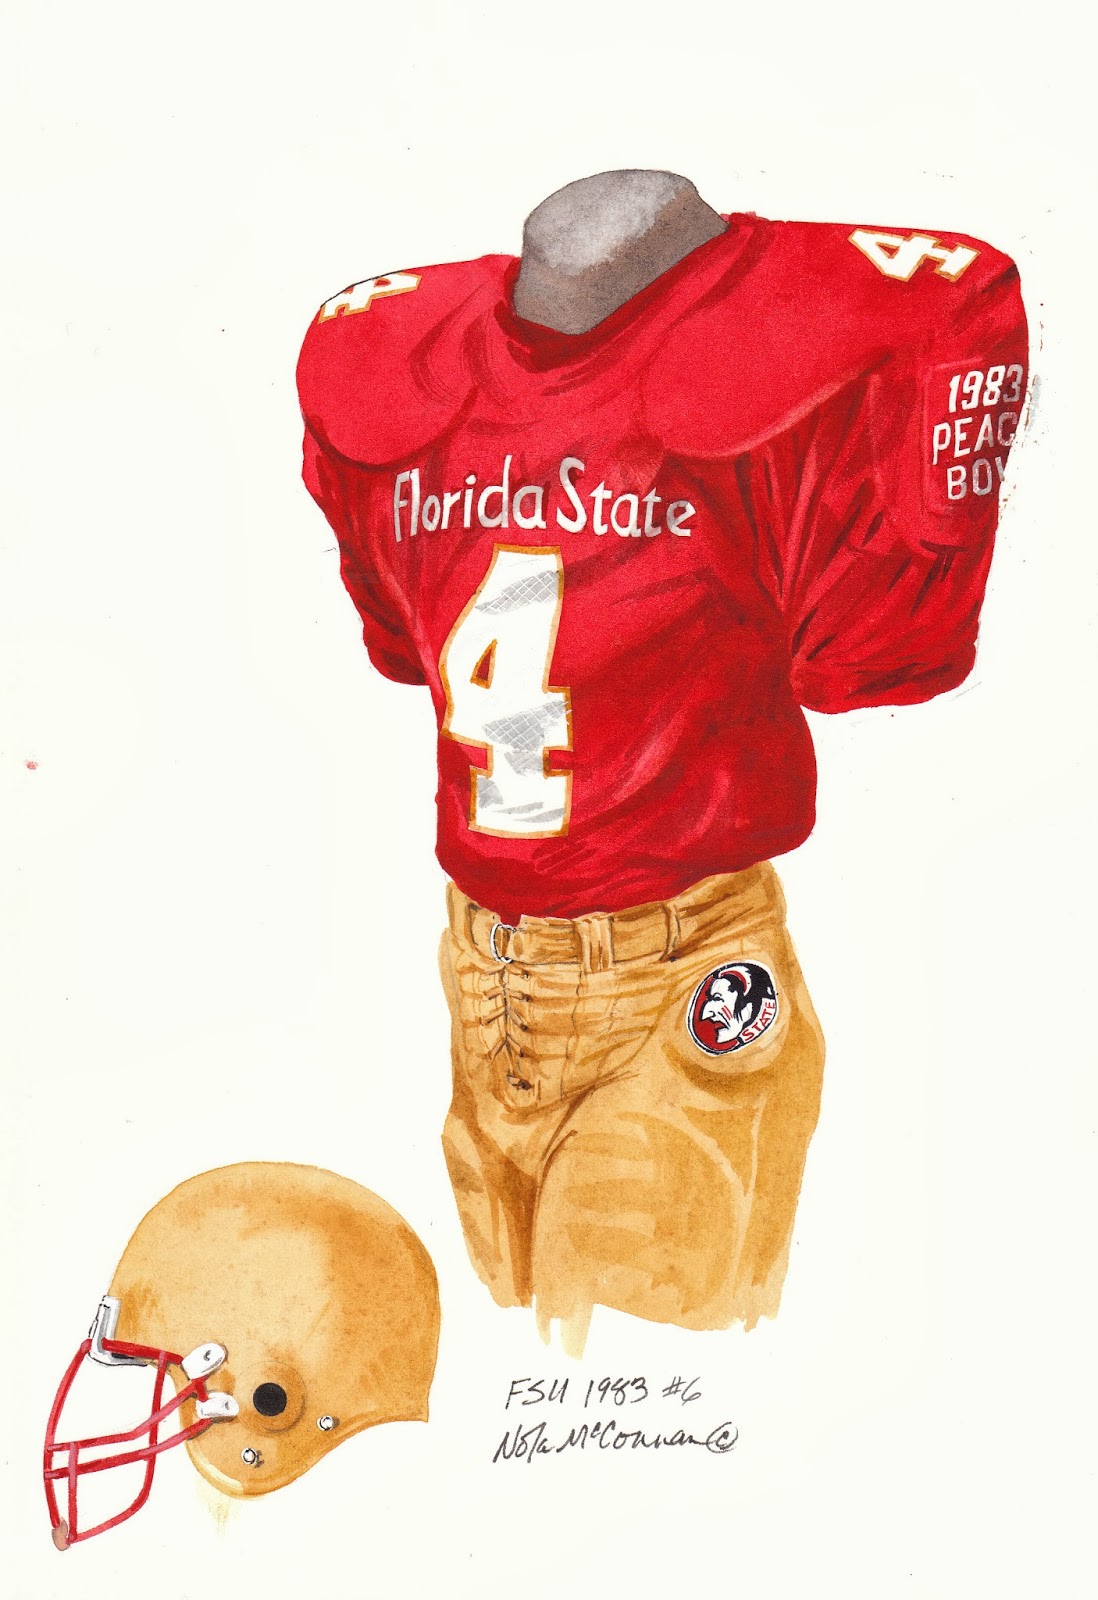 Florida State Uniform Database – A visual history of Florida State